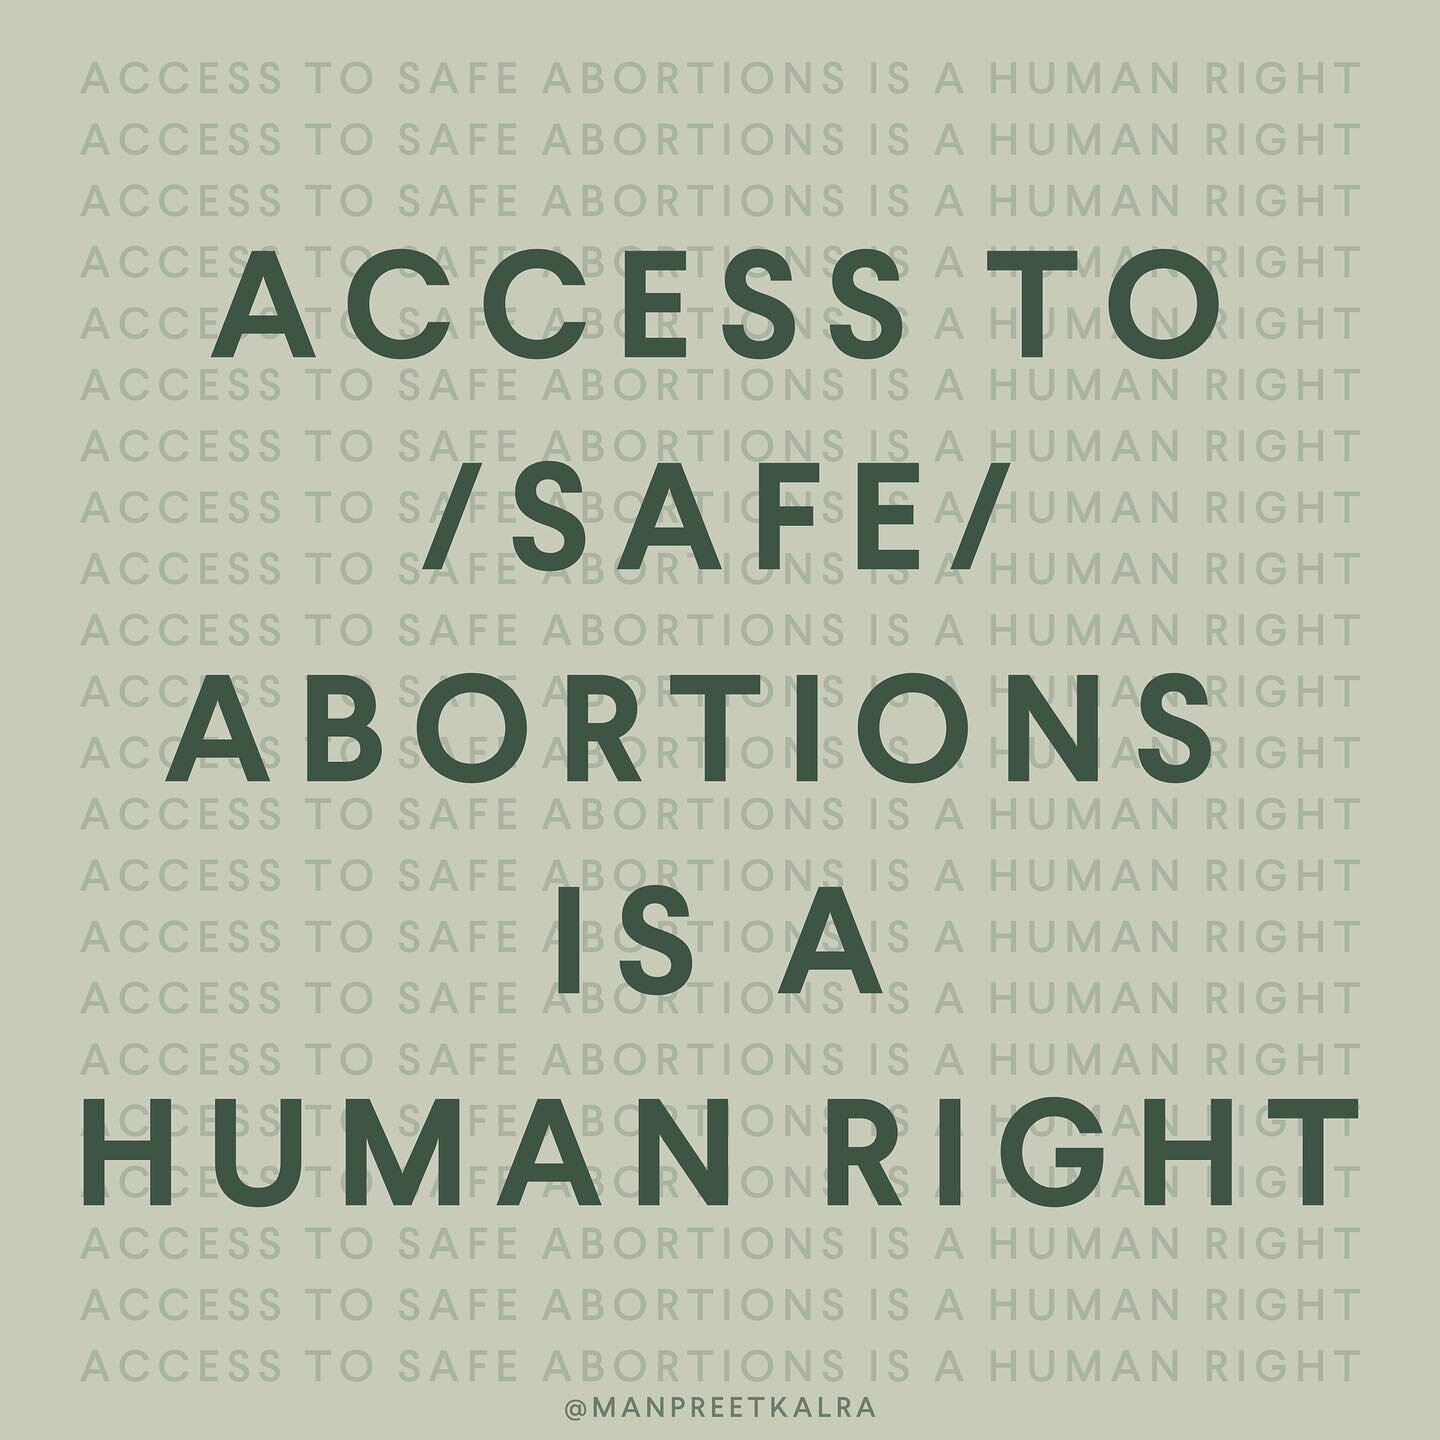 It&rsquo;s been a month since the US Supreme Court overturned Roe v Wade. State abortion laws are making it harder (if not impossible) for pregnant people to access safe abortions. 

Banning abortions is not about protecting lives. It is about contro